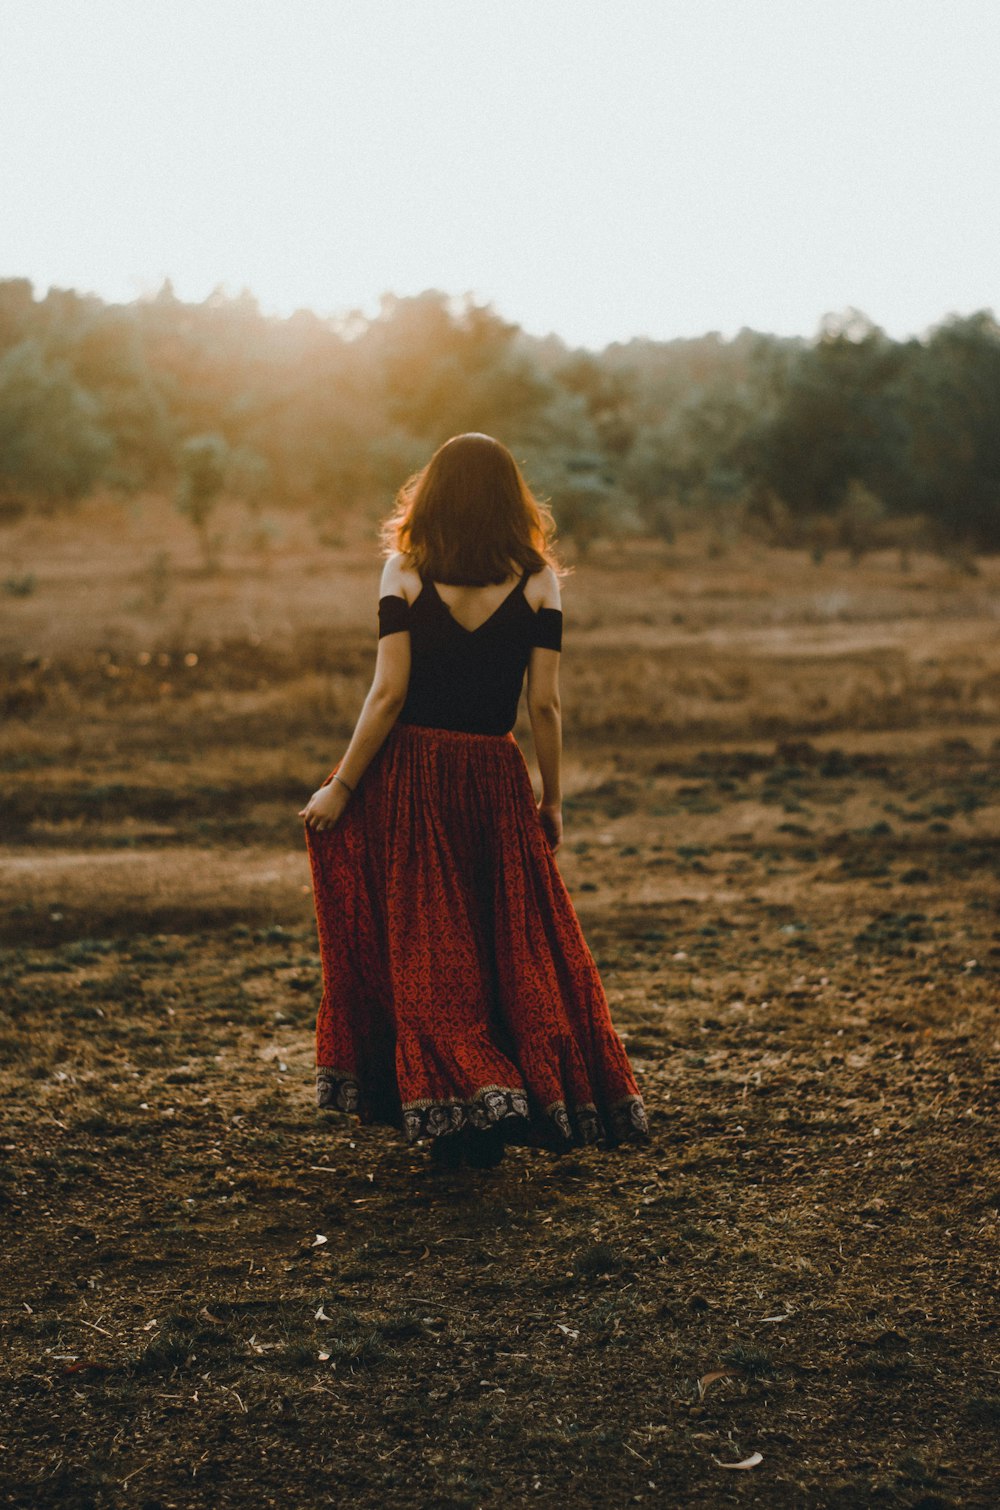 woman in black and red dress standing on dirt ground during daytime